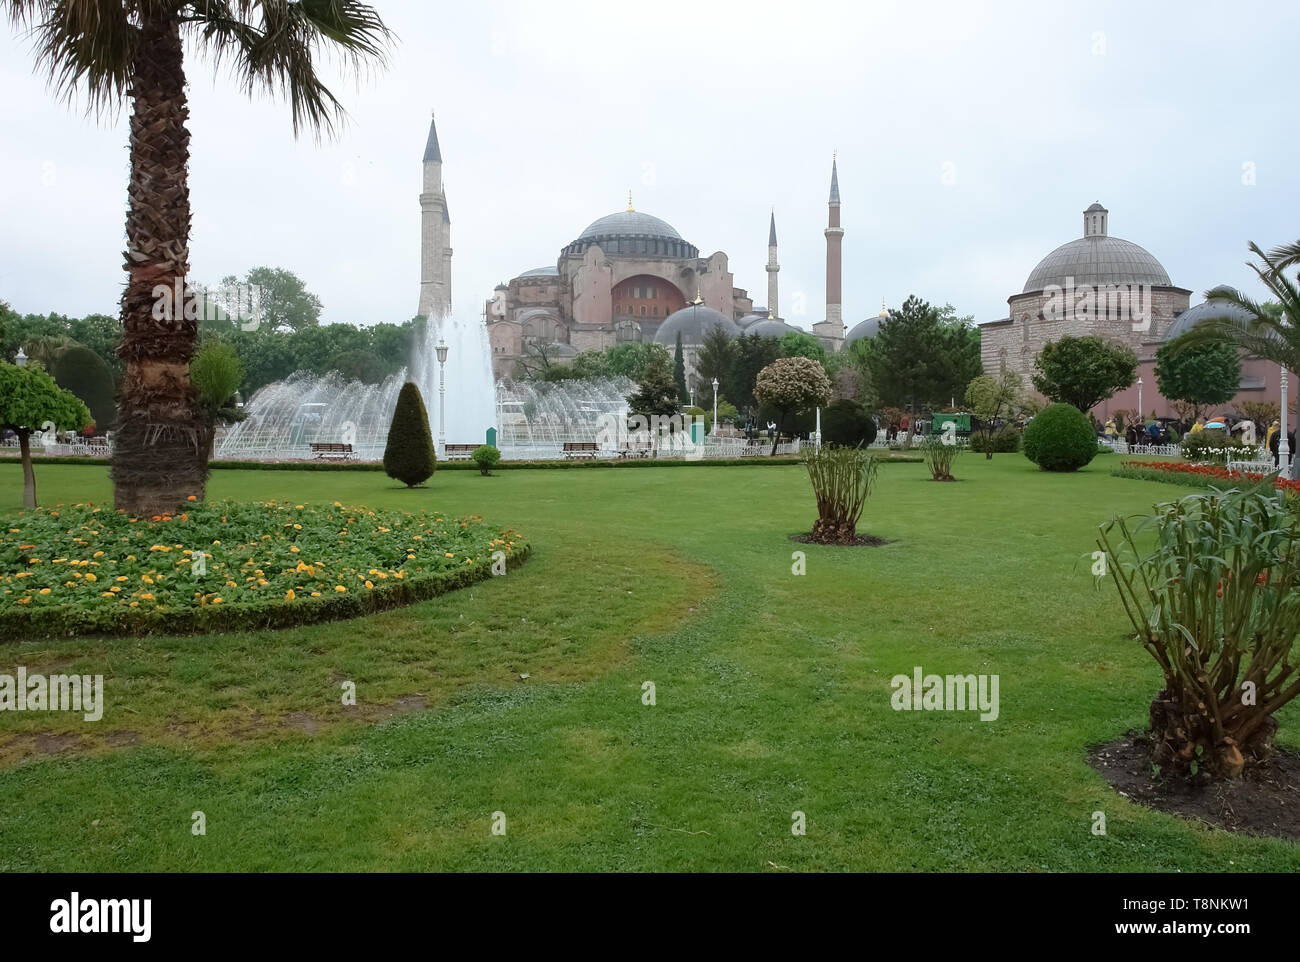 Istanbul, Turkey - April 26, 2008: View of the Hagia Sophia, a fountain and green lawn in Istanbul, Turkey. Stock Photo